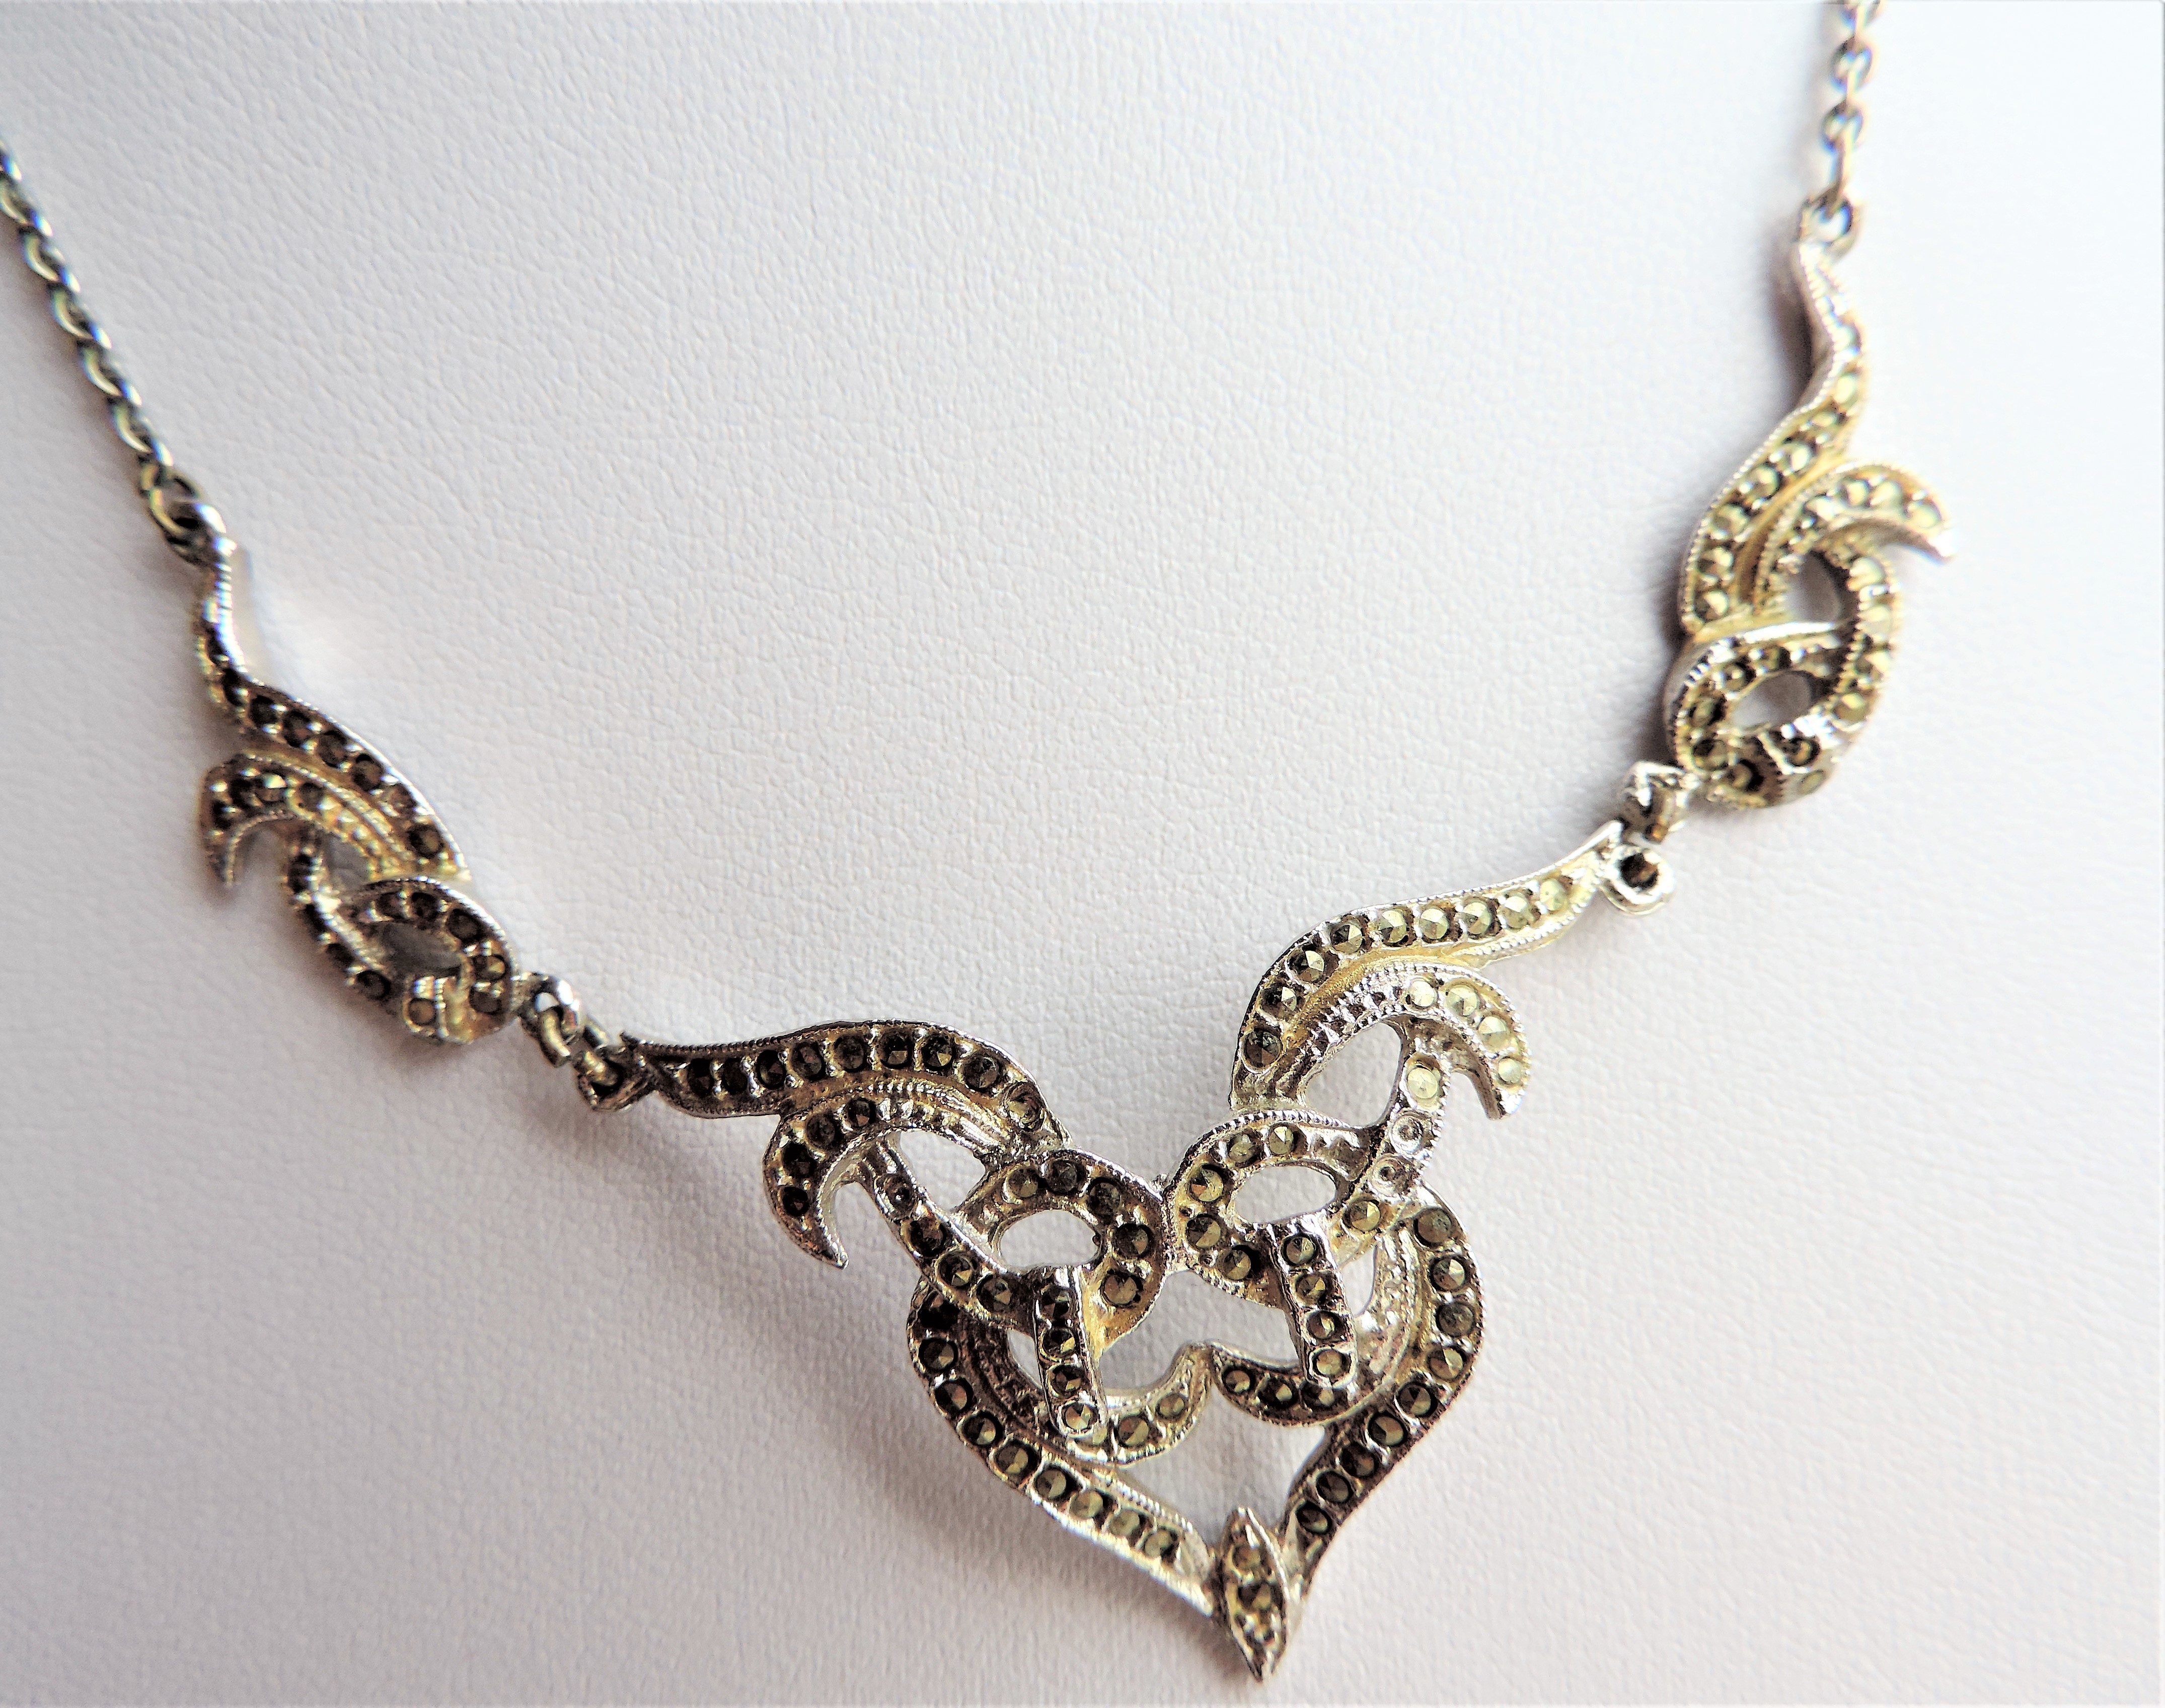 Vintage Marcasite Necklace - Image 2 of 3